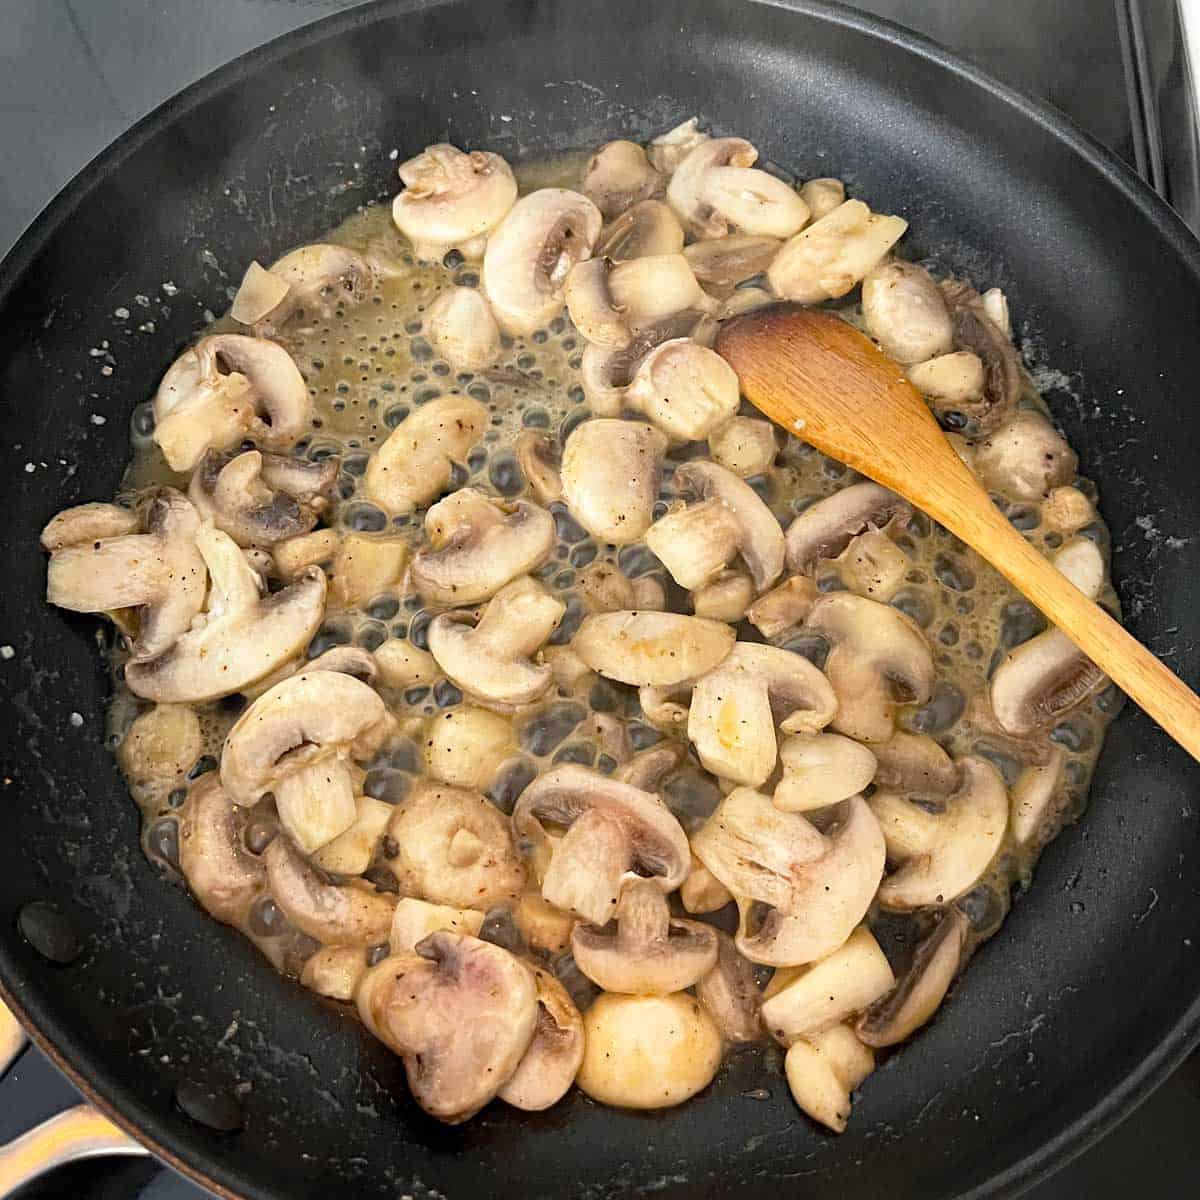 The mushrooms release liquid into the skillet.